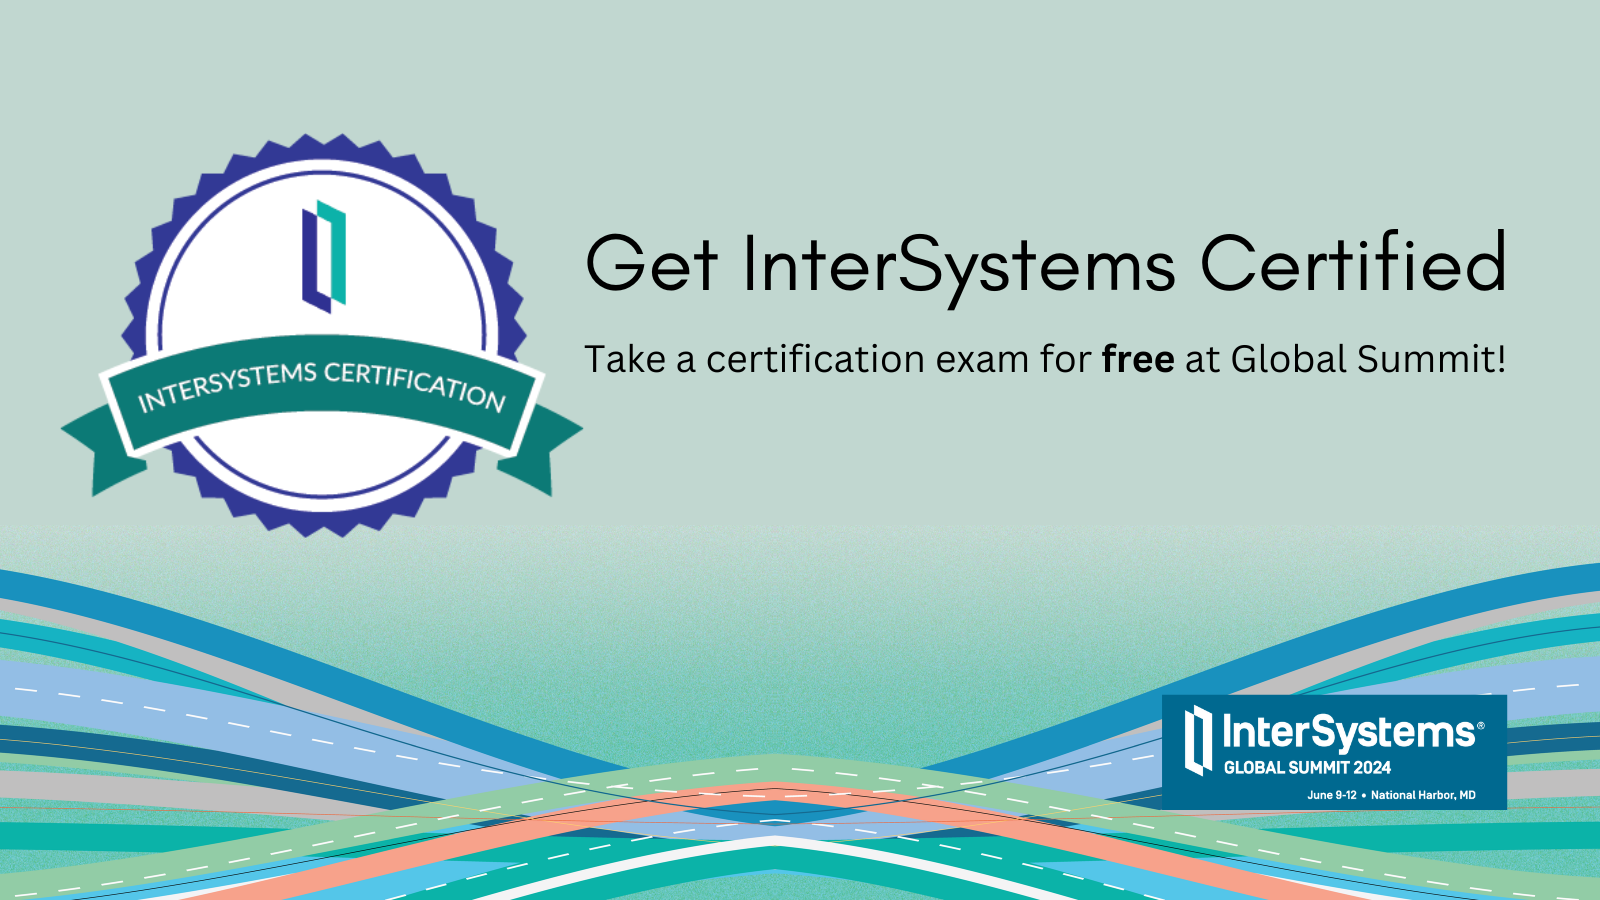 Get InterSystems certified. Take a certification exam for free at Global Summit!